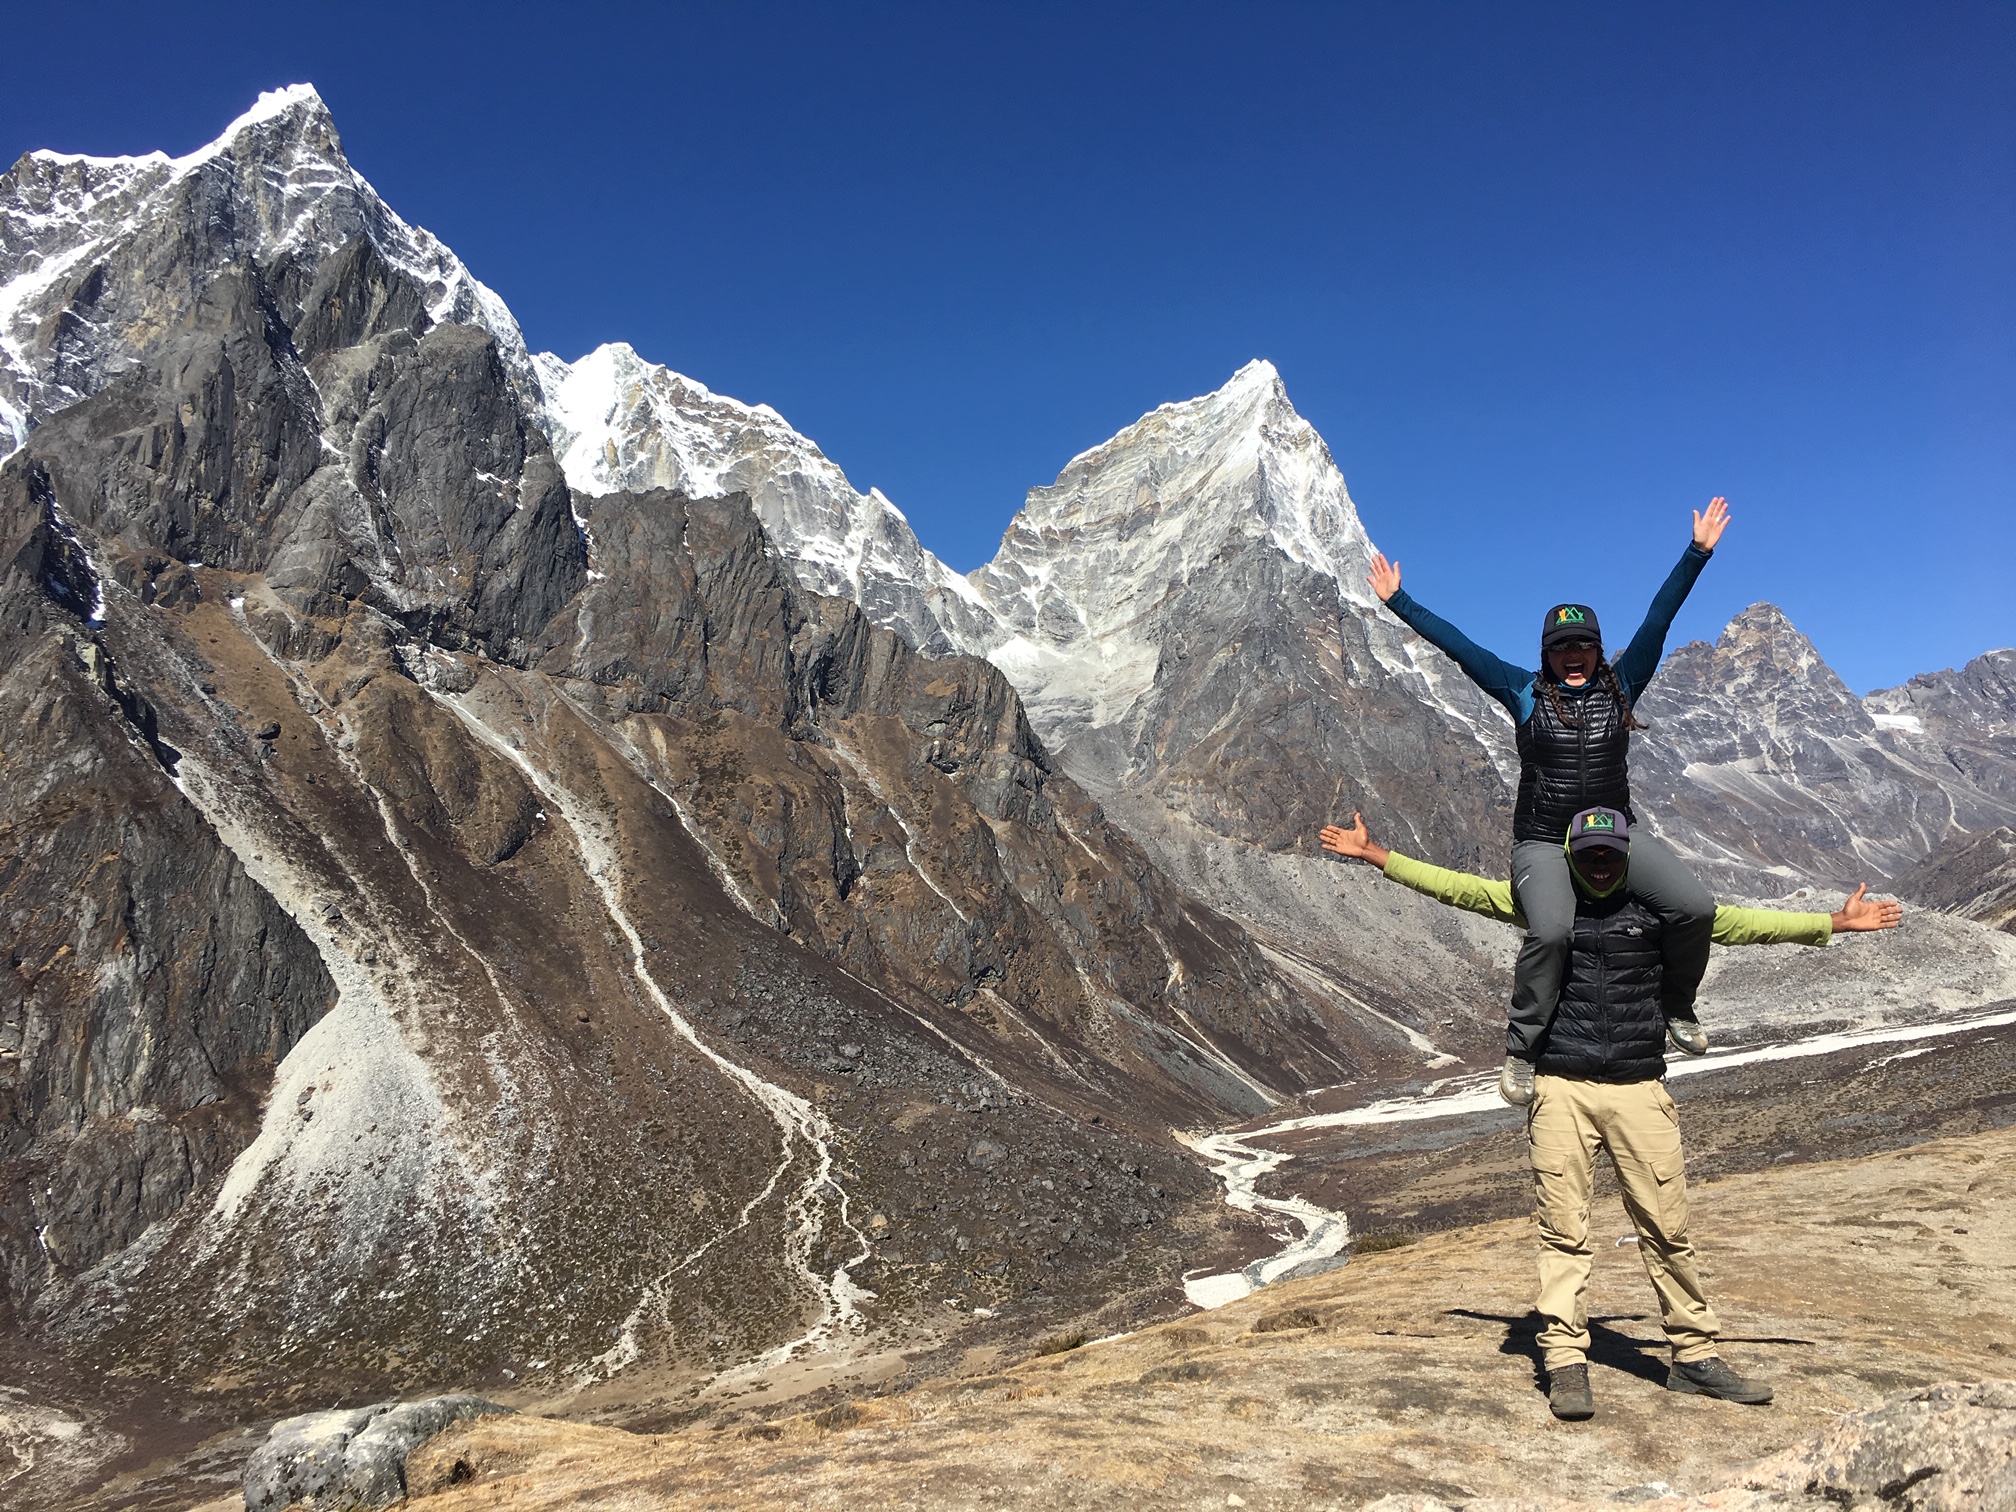 The Journey from Dingbouche to Lobuche